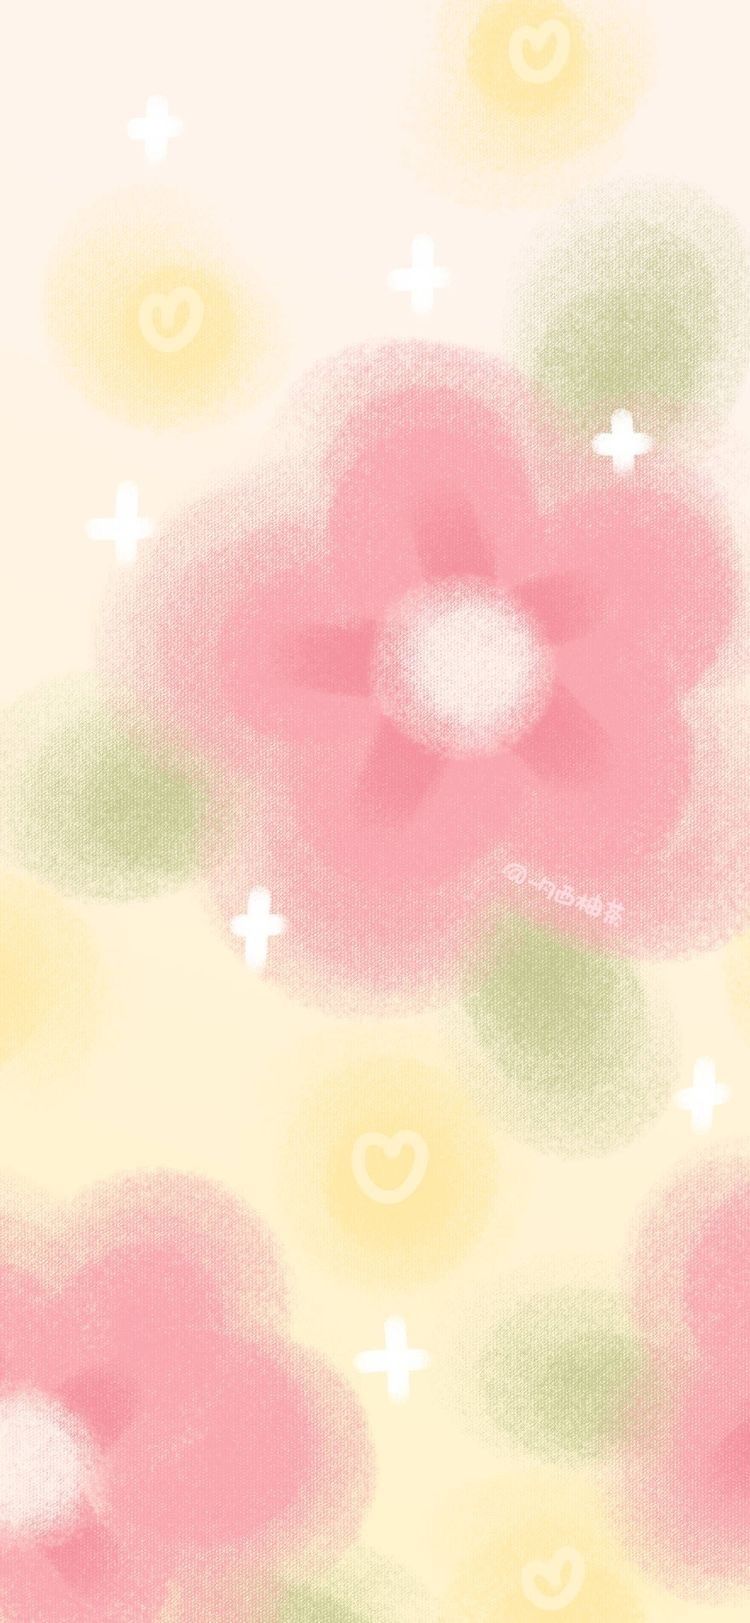 IPhone wallpaper with flowers - Sanrio